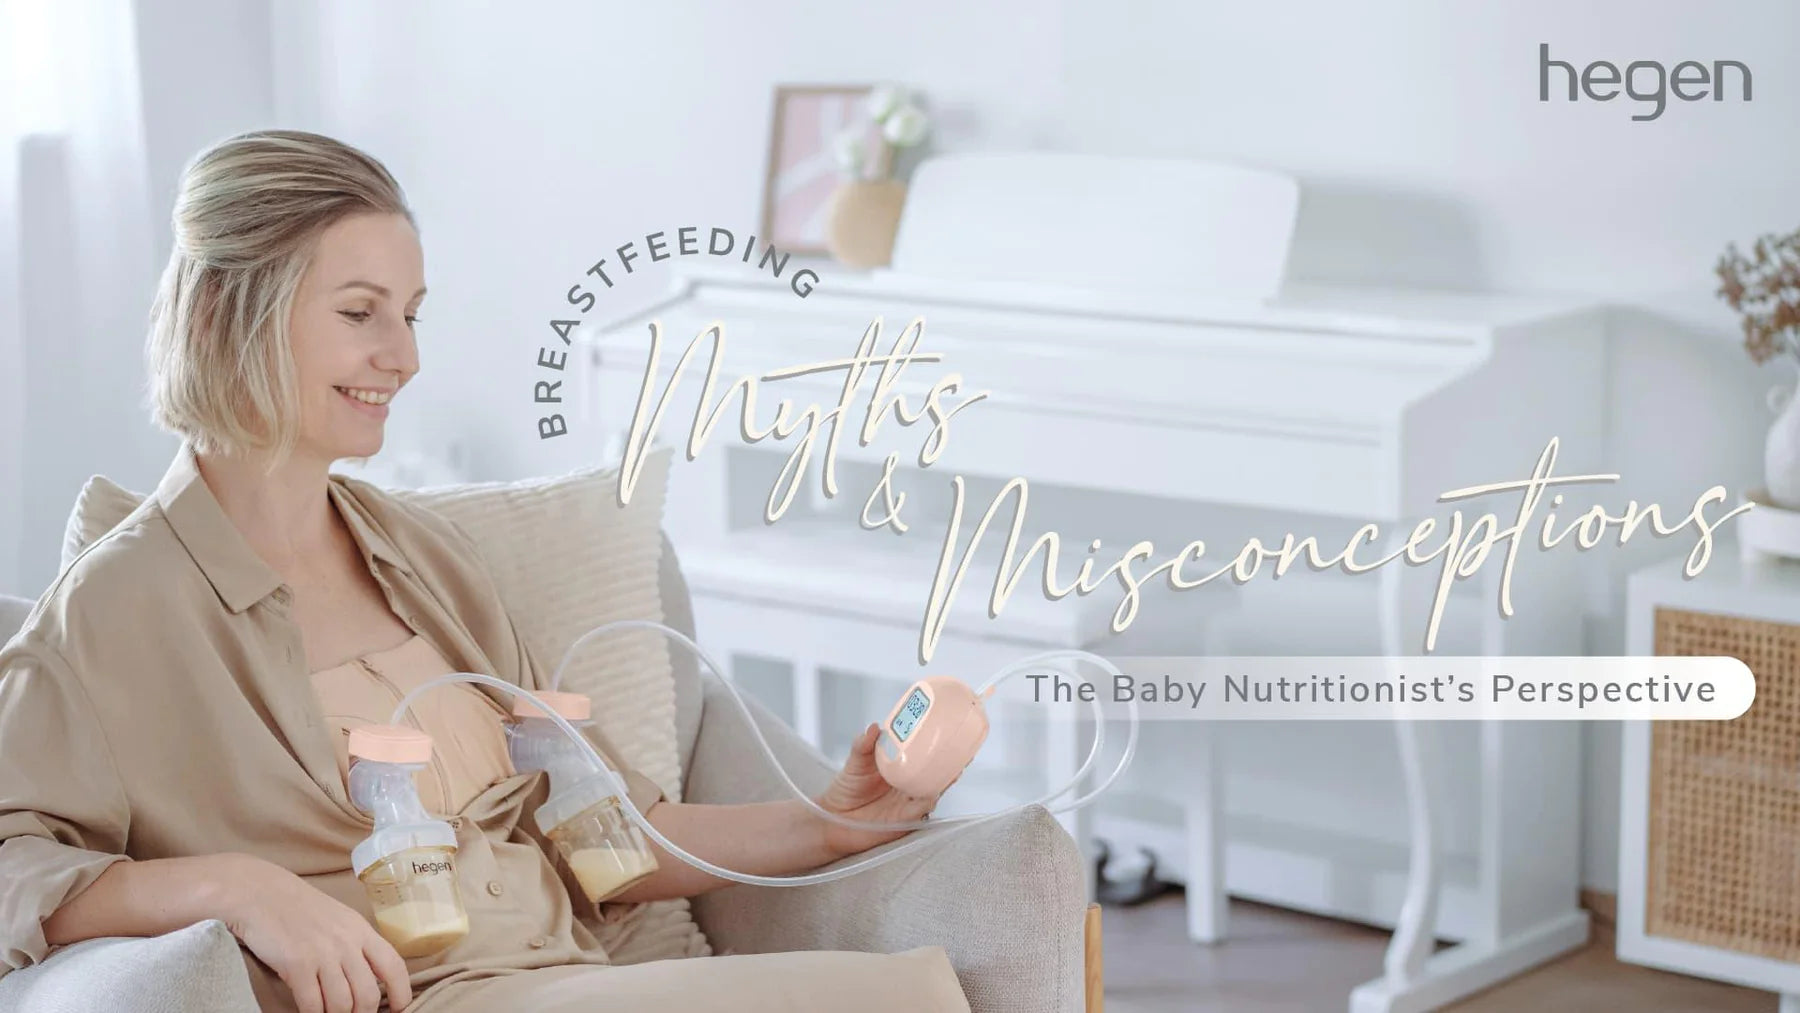 Breastfeeding Myths and Misconceptions: The Baby Nutritionist’s Perspective